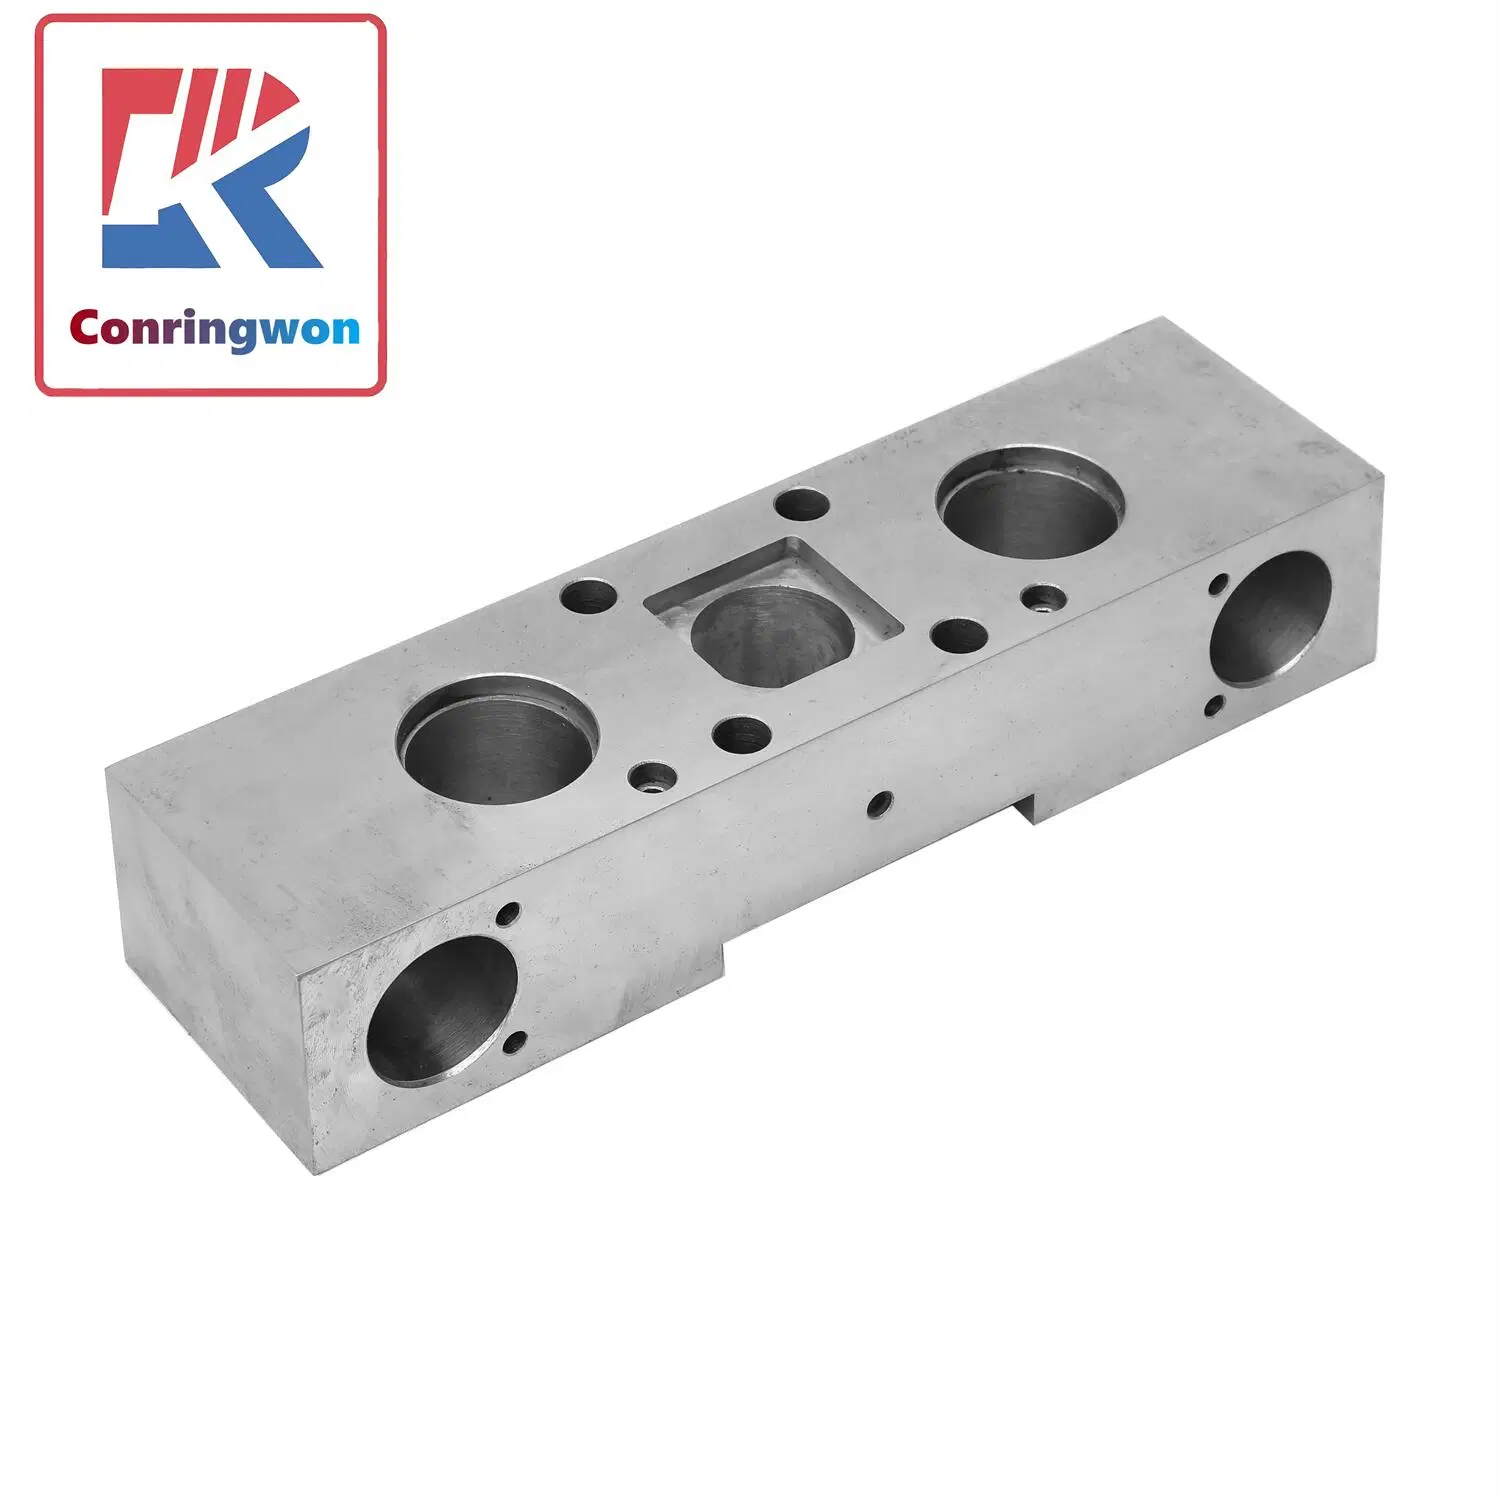 Custom CNC Steel Connector Copper Housing Stainless Steel Mold Aluminum Machinery/Machining/Machined/Machinery Part Threaded Machining Service